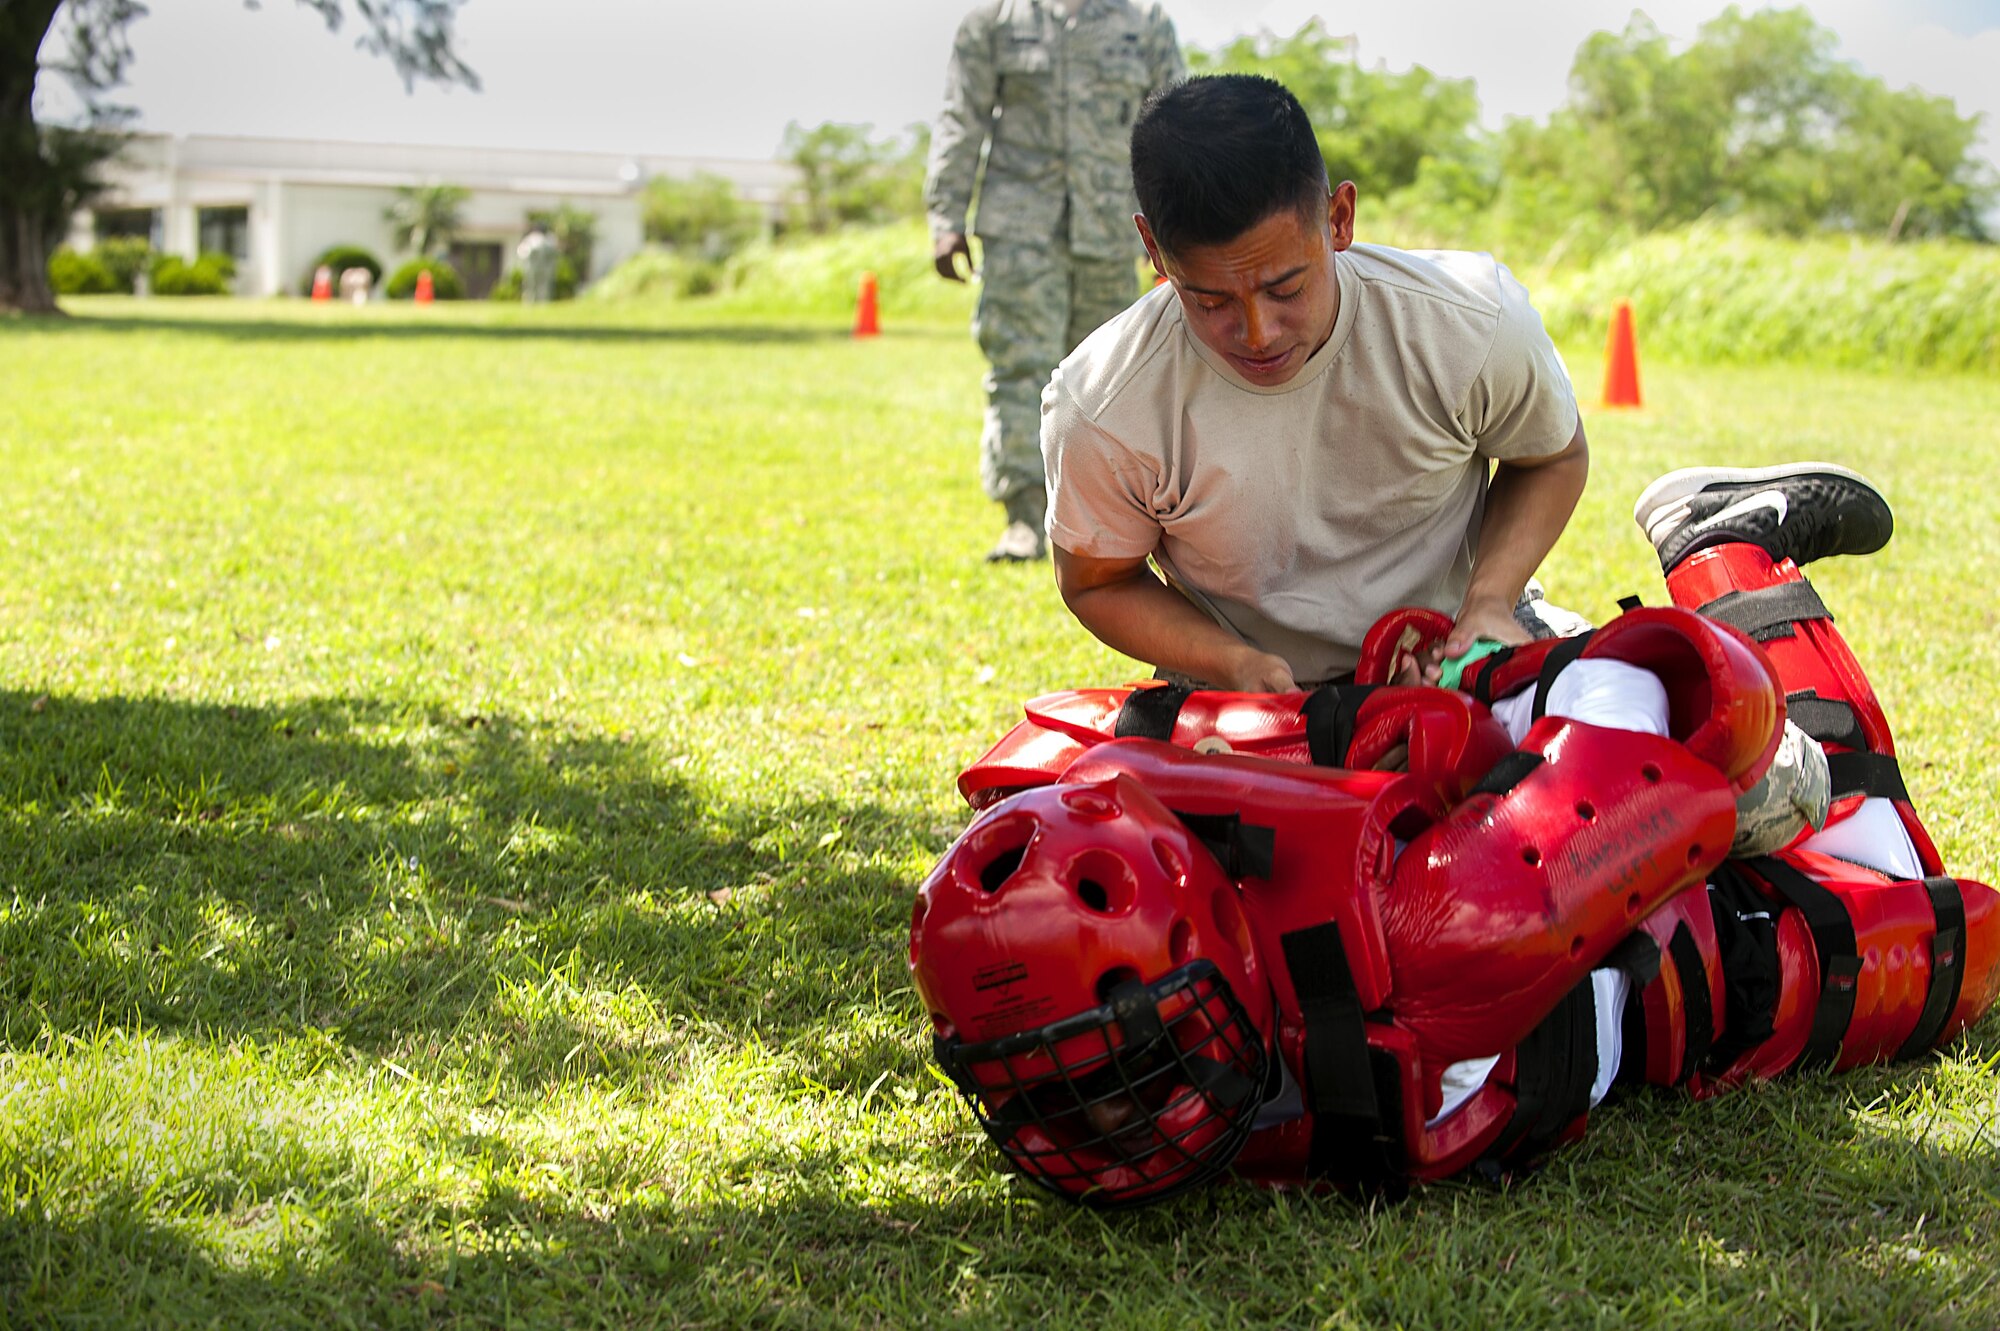 U.S. Air Force Airman Joshua Lenaire, 18th Security Forces Squadron response force member, subdues an attacker in a red-man suit after being sprayed with OC spray during training July 13, 2016, at Kadena Air Base, Japan. Security forces members must be able to perform their mission, even if they are under extreme pain and impaired vision. (U.S. Air Force photo by Airman 1st Class Corey M. Pettis)